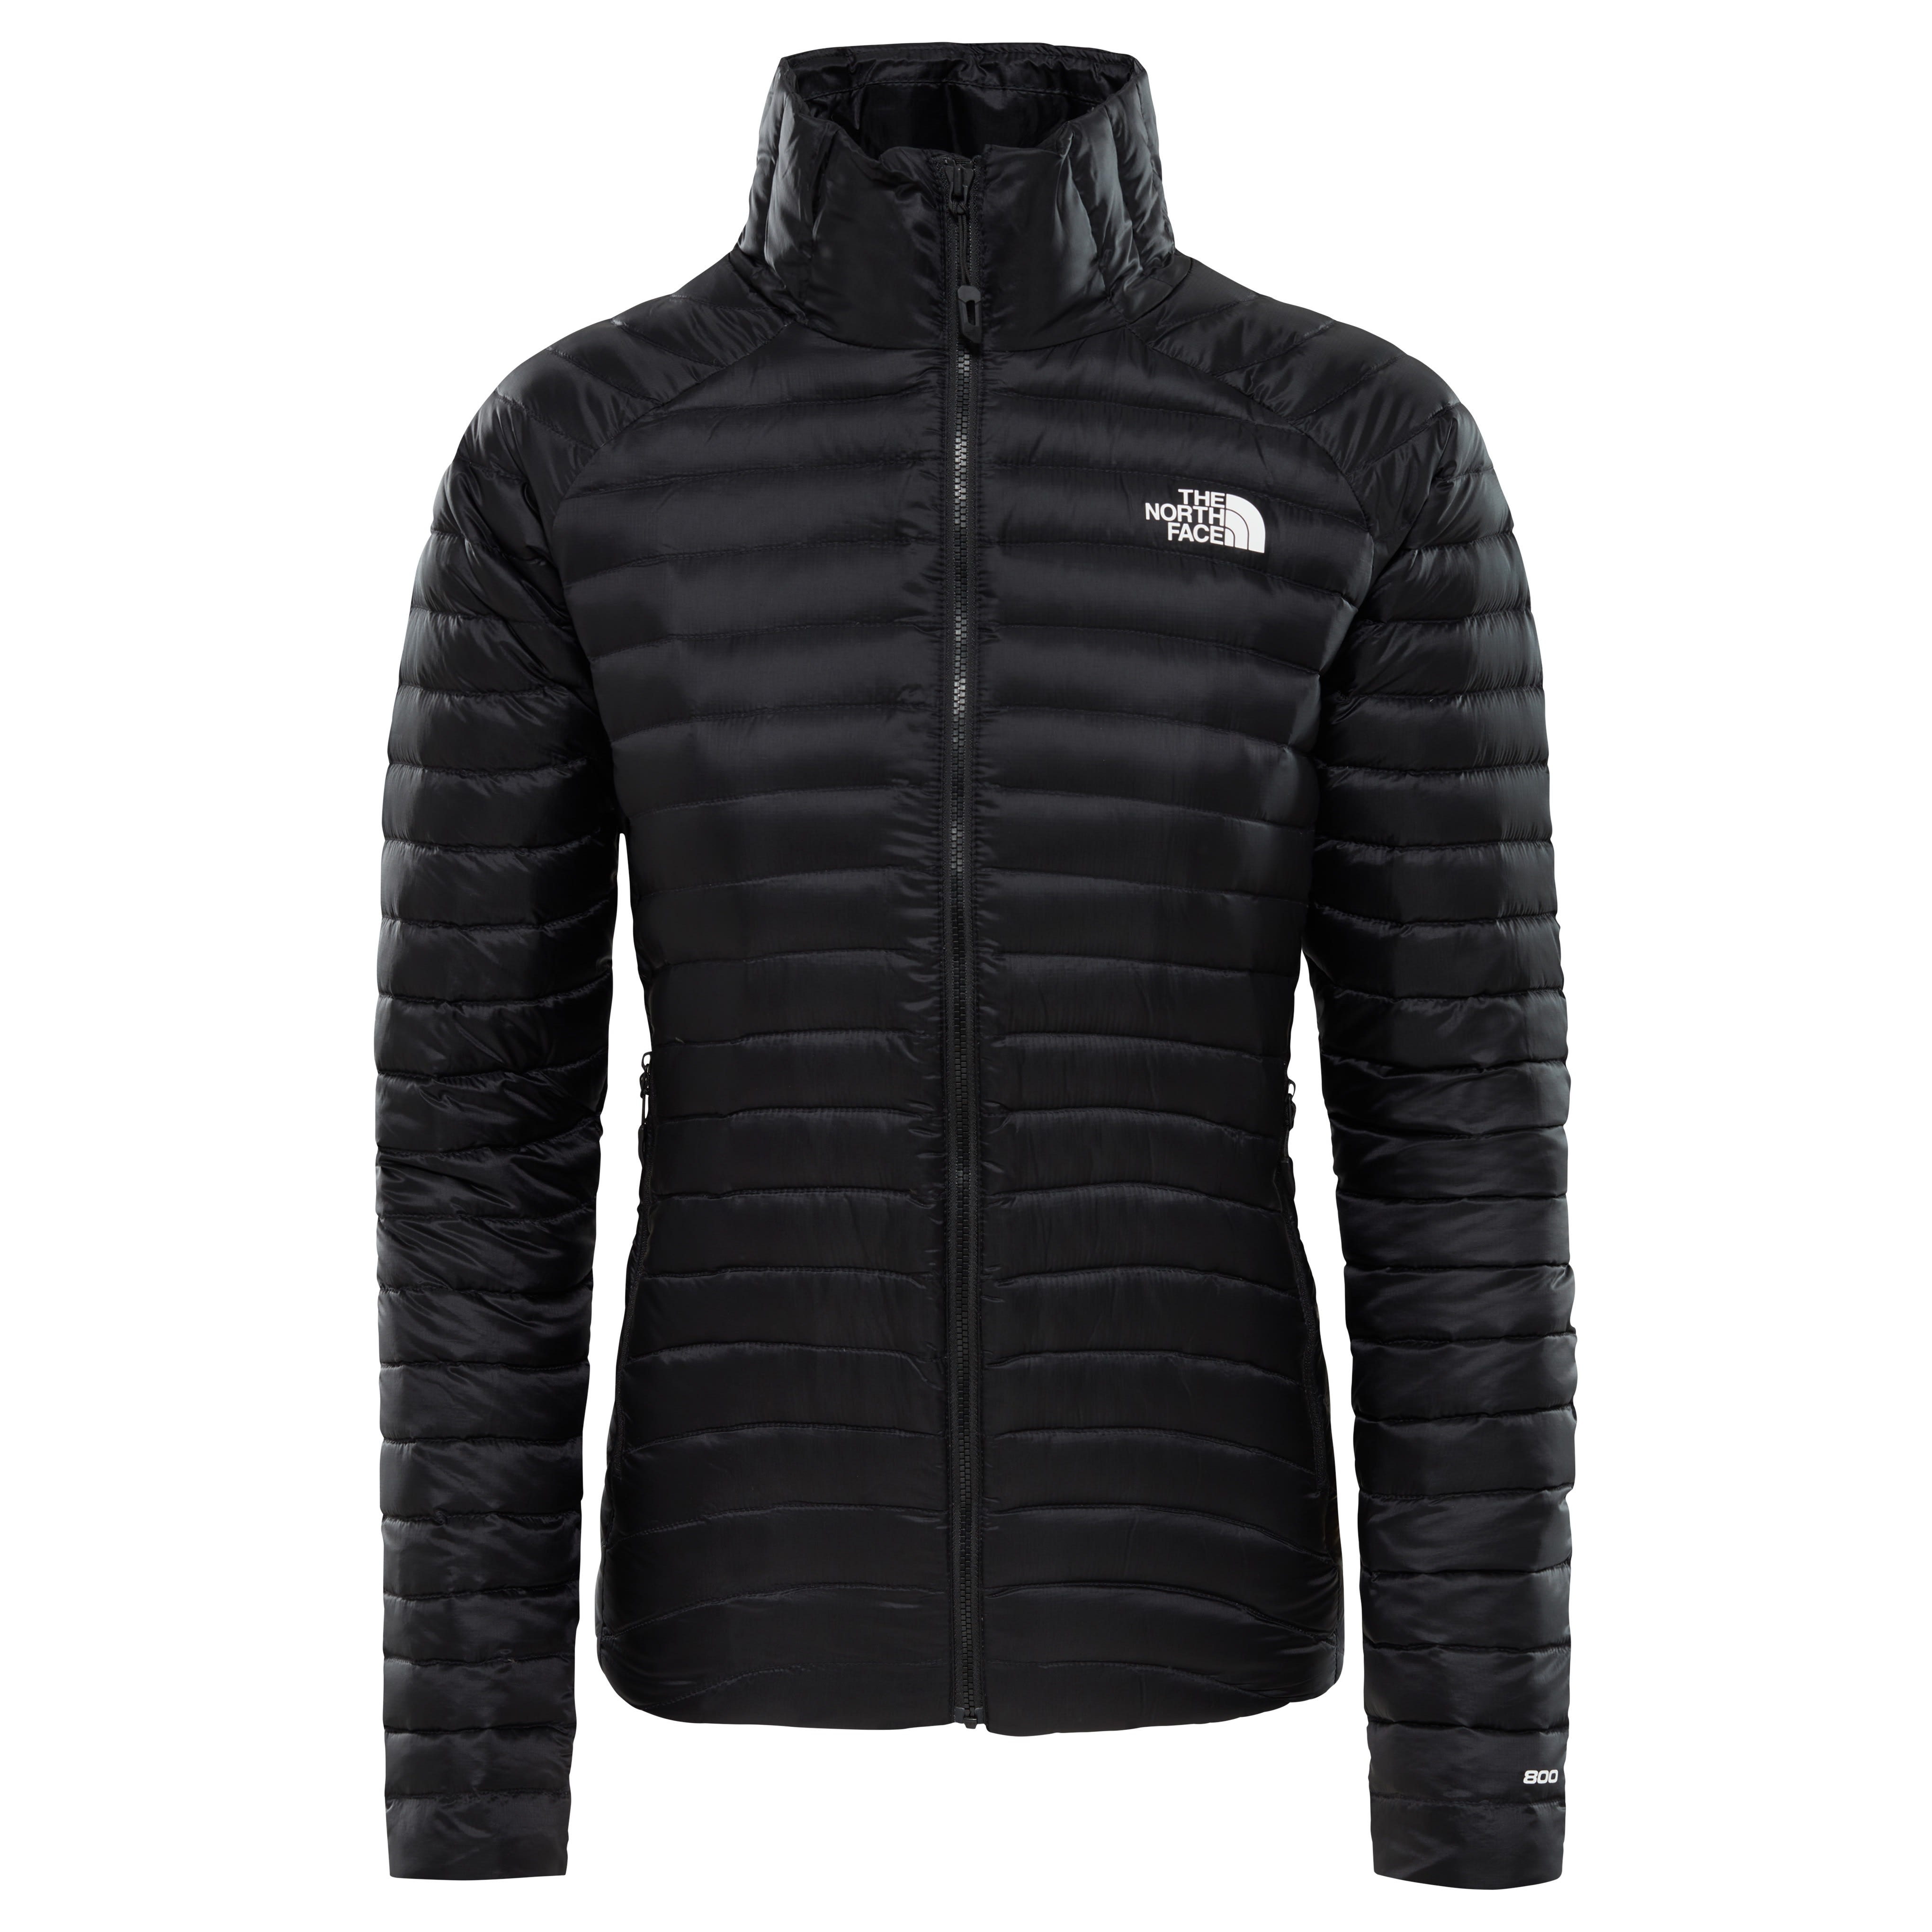 North Face Women's Impendor Down Jacket 